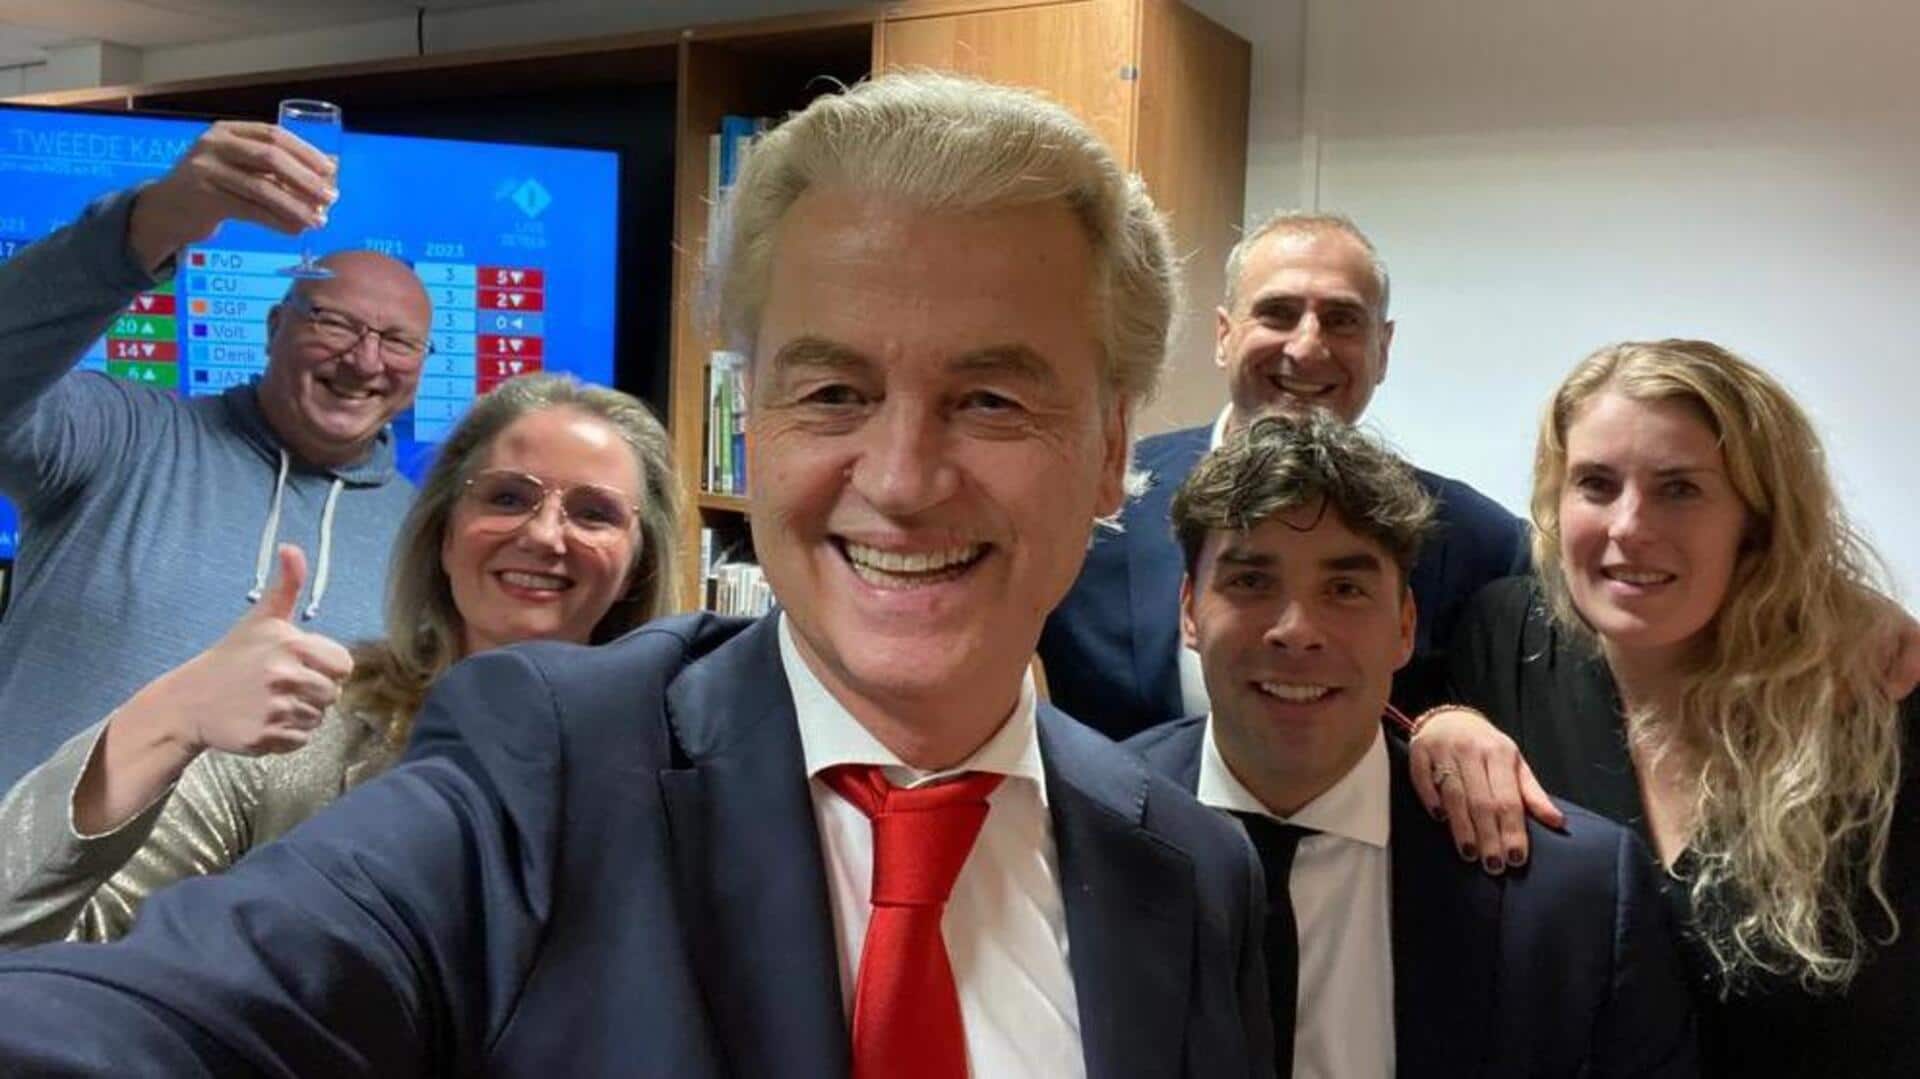 Everything you should know about next Dutch PM Geert Wilders